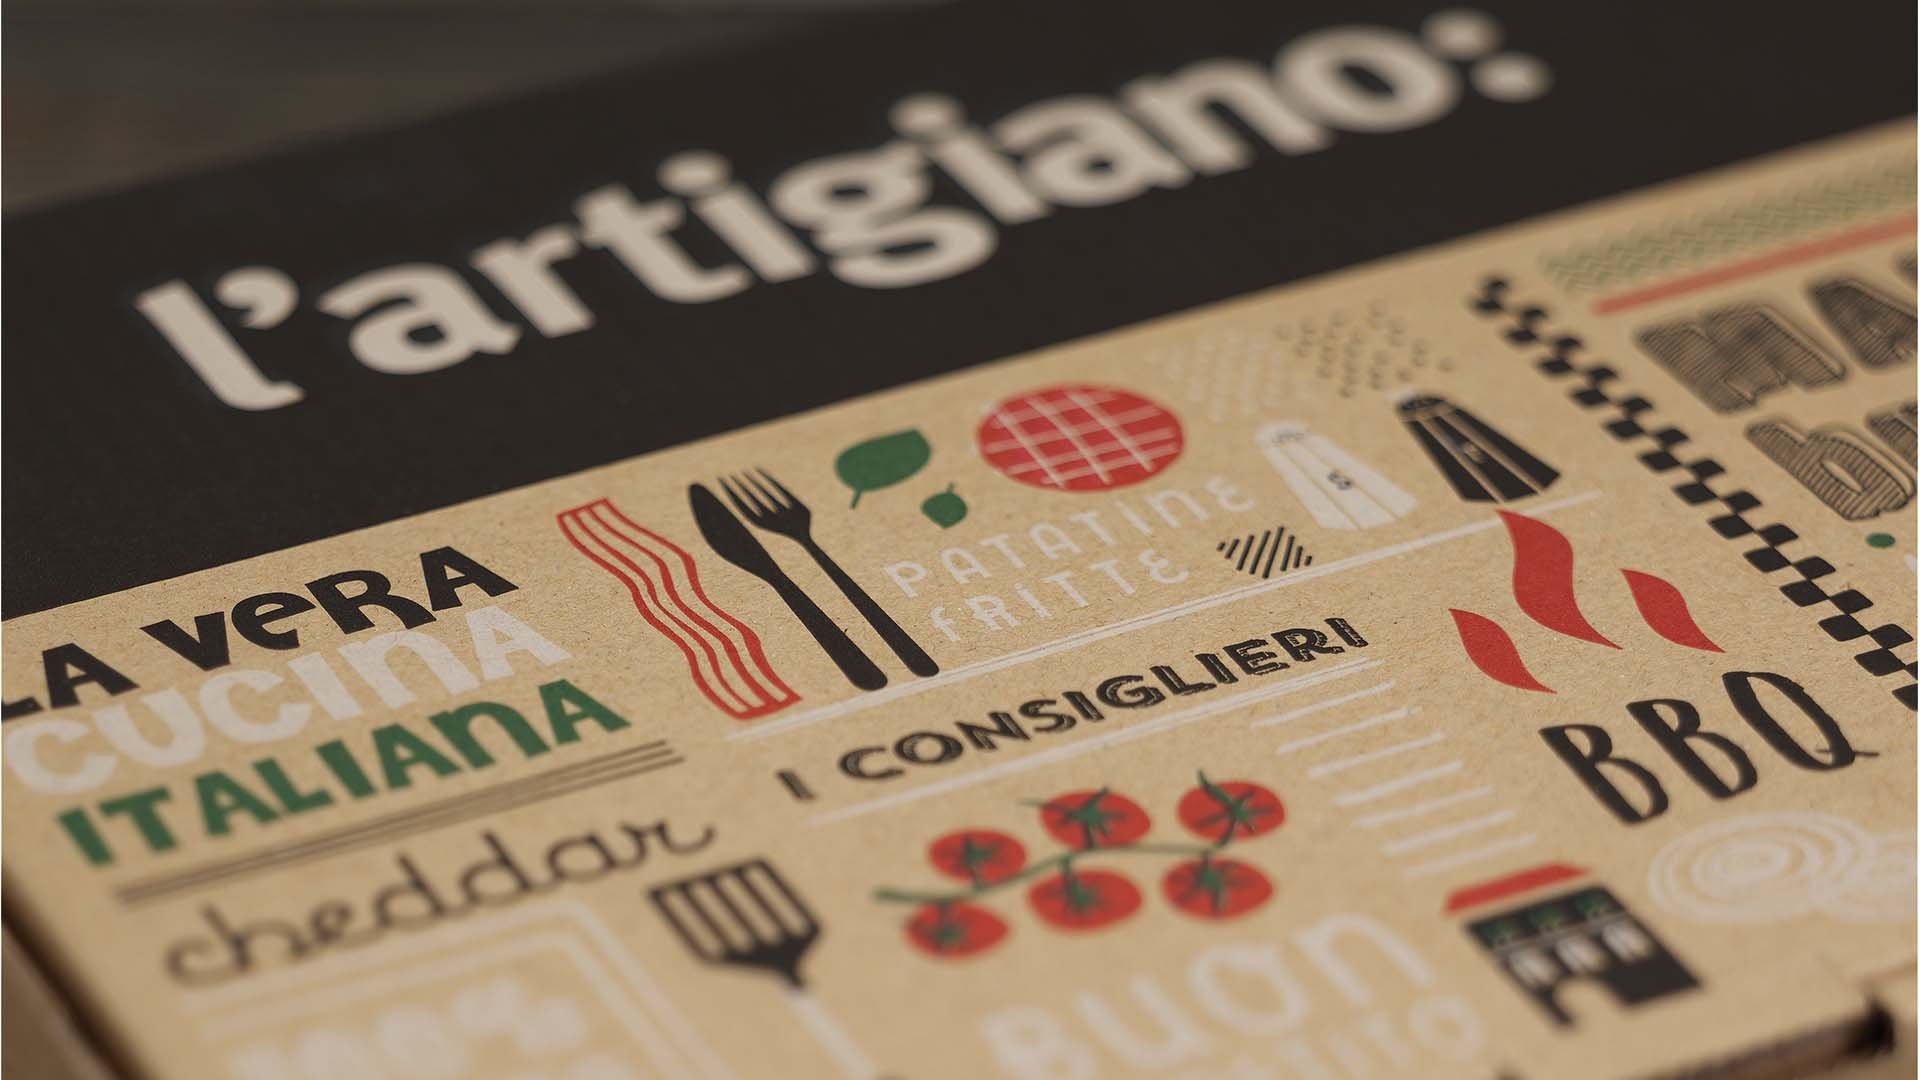 Packaging for L' artigiano Italian food delivery brand with custom illustrations